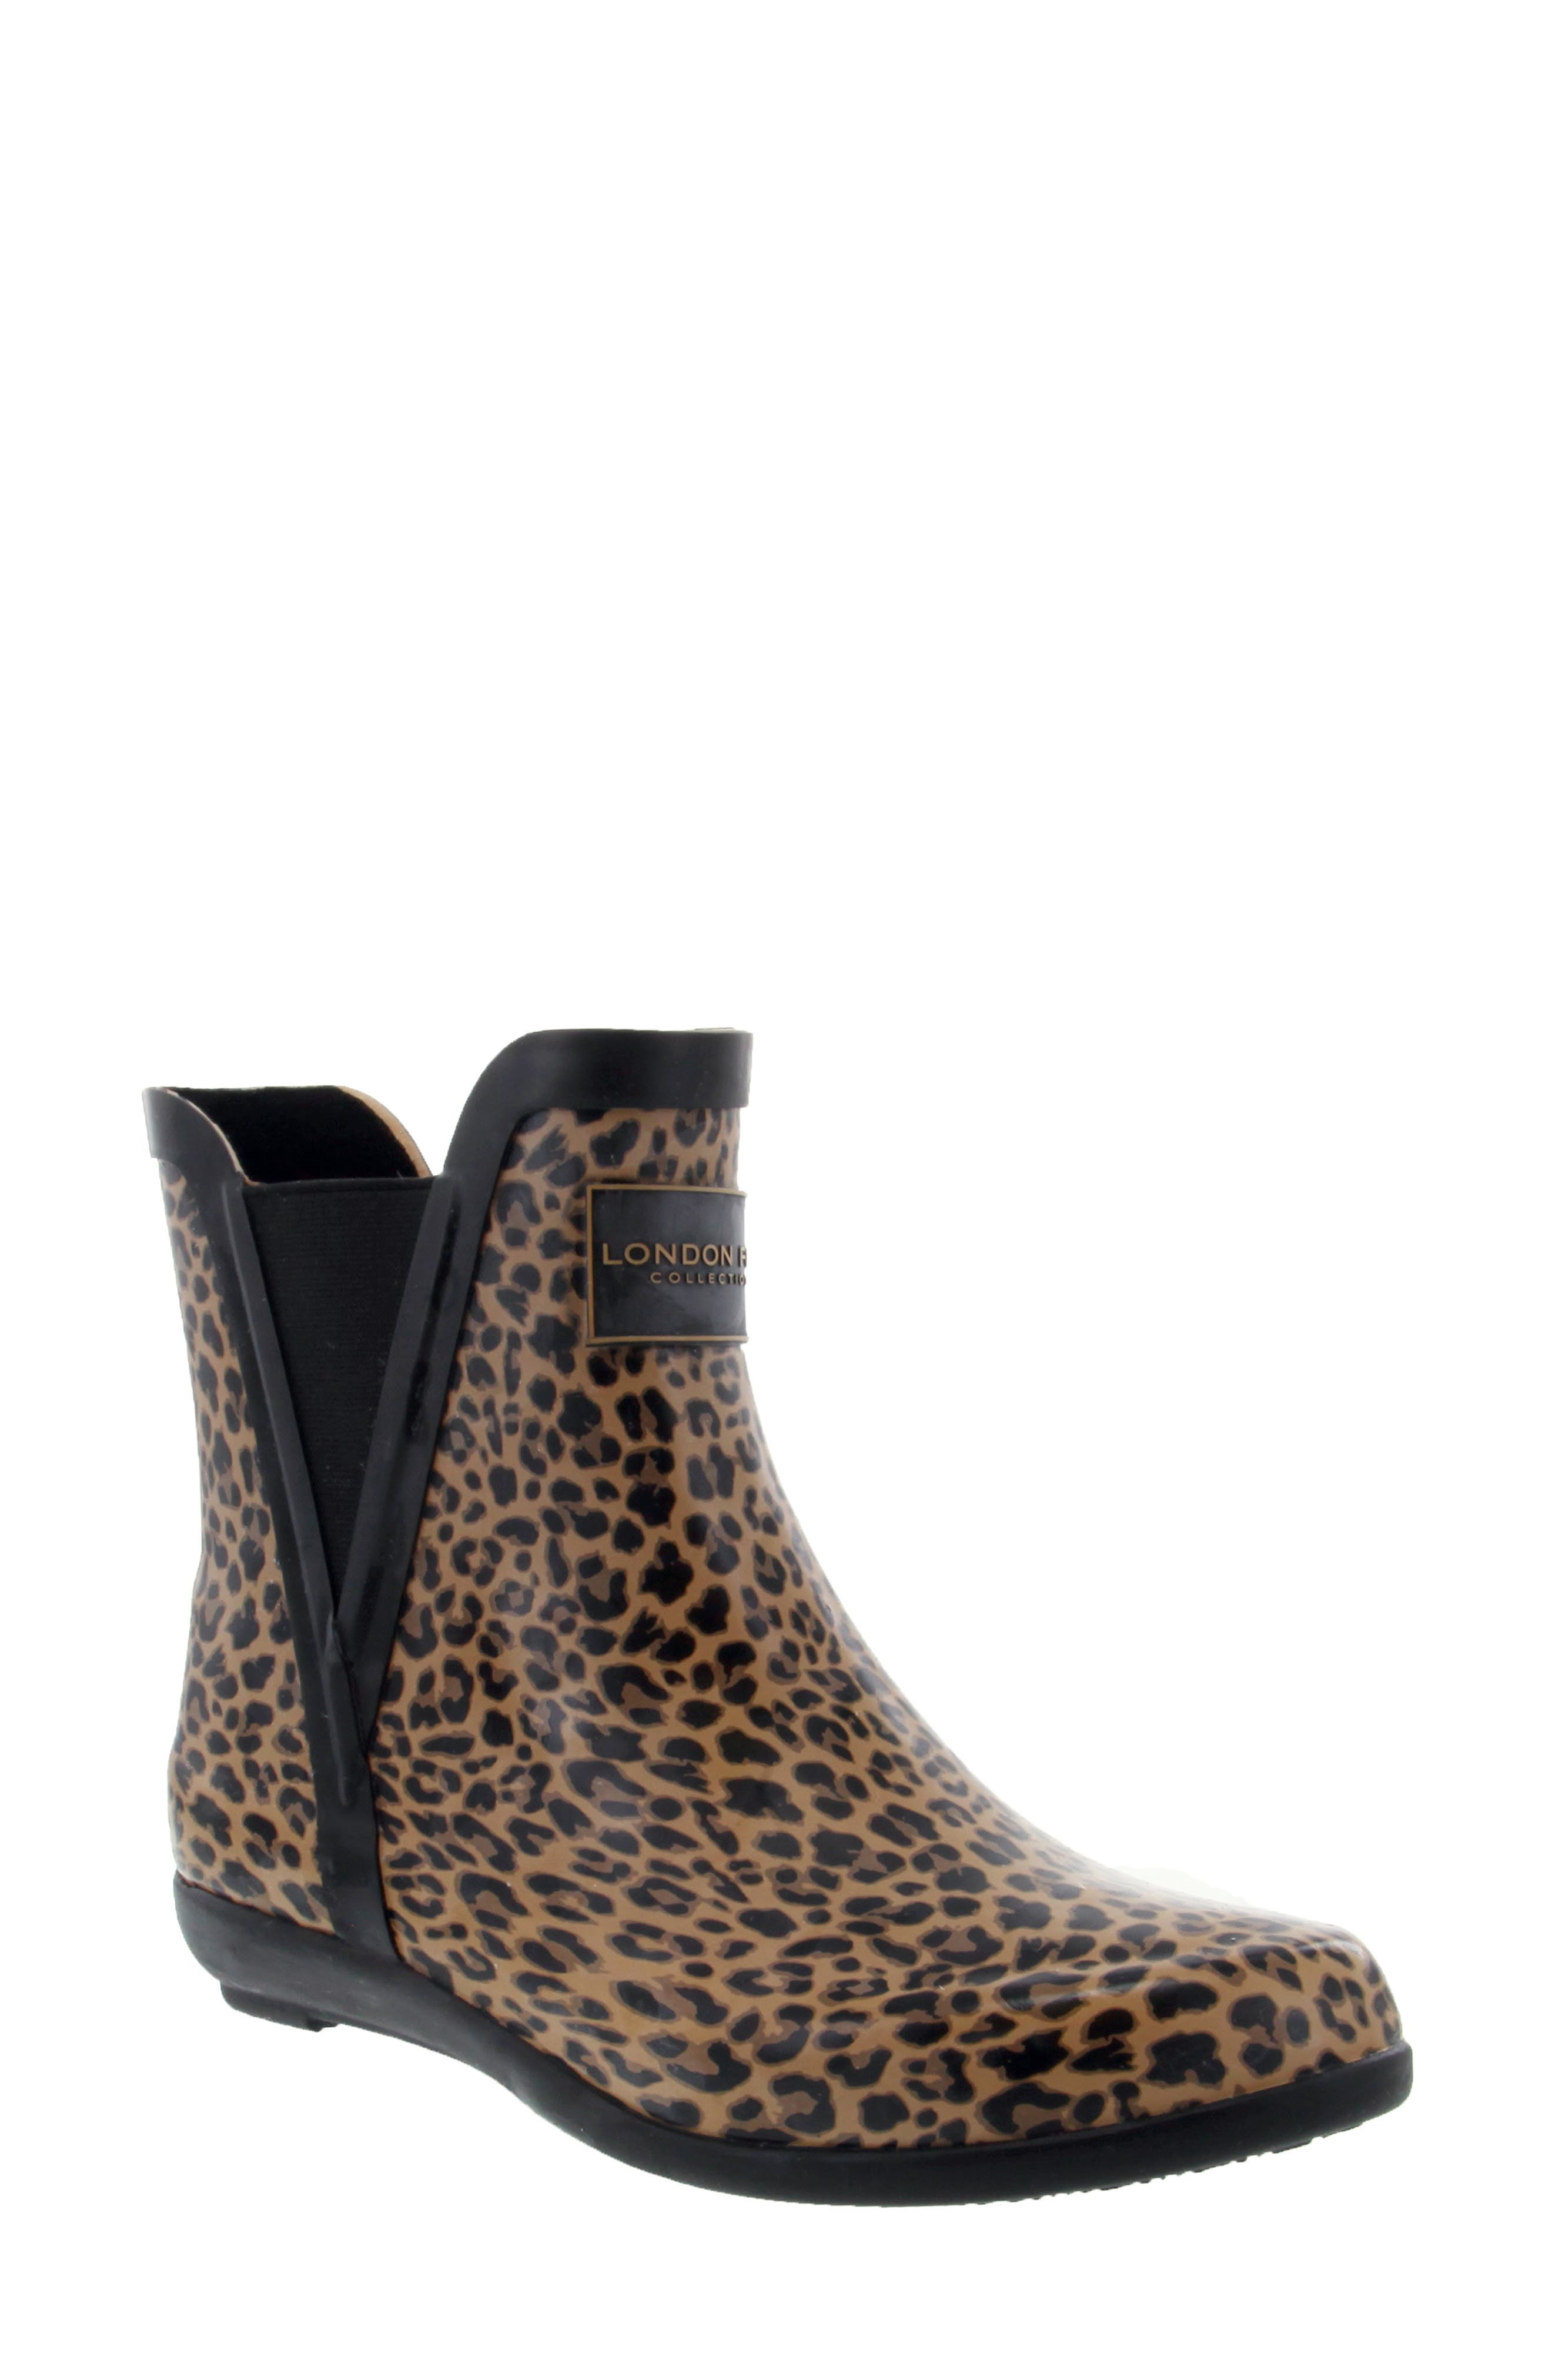 London Fog Pull-on Ankle Rain Boot In New Leopard